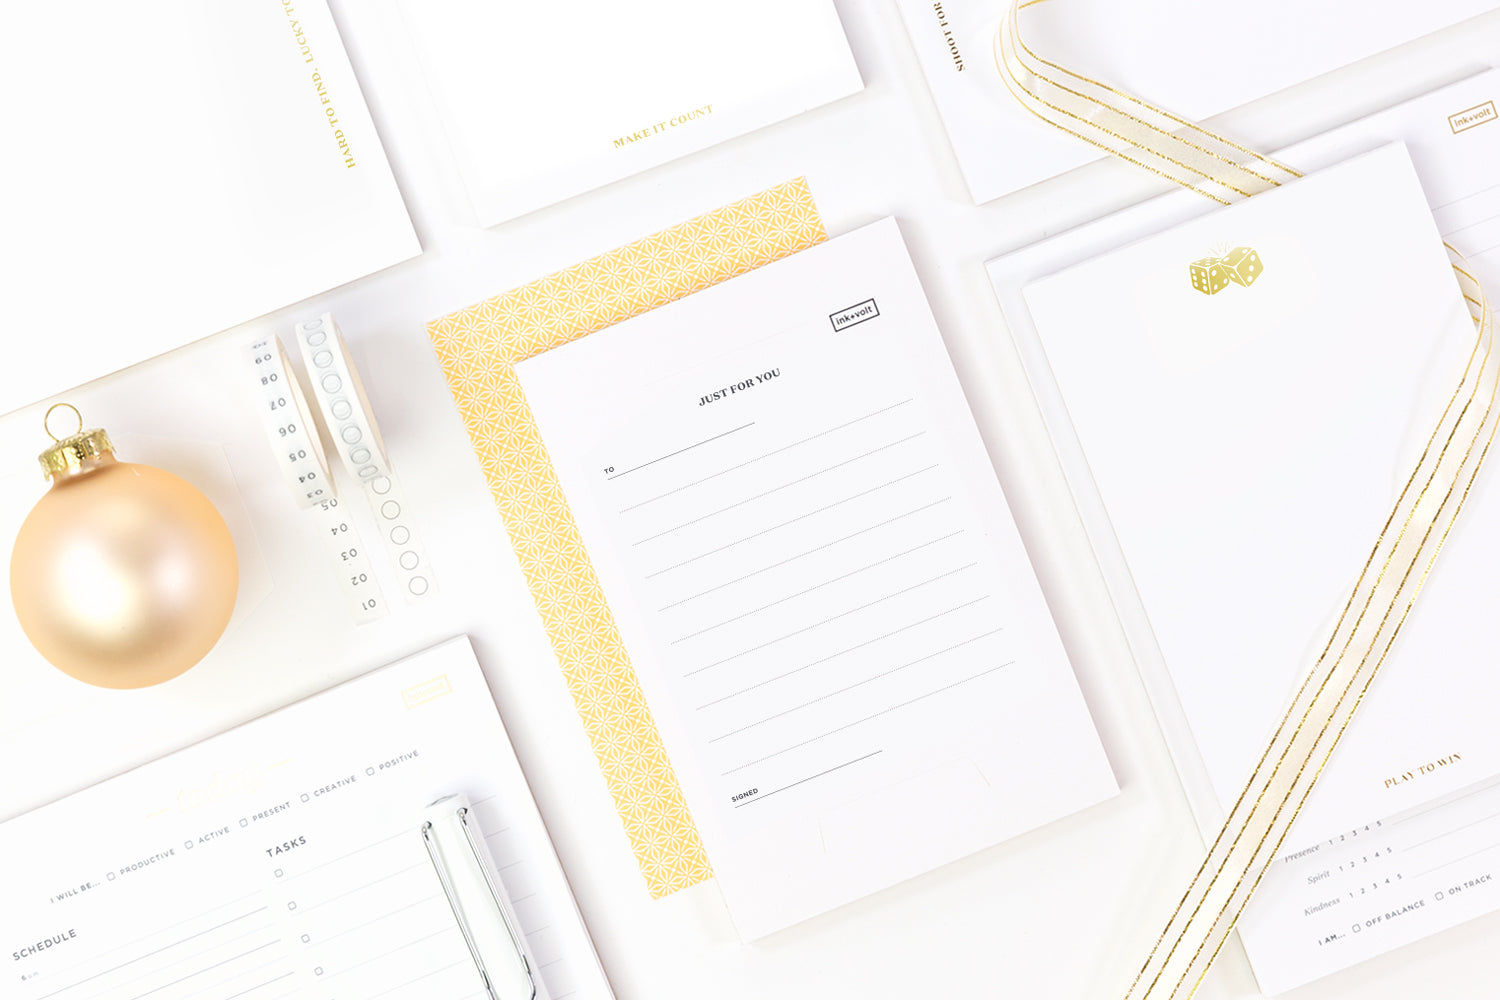 A bright, white assortment of small gifts for coworkers: white and gold notepads, gold ribbons, and a gold holiday ornament.